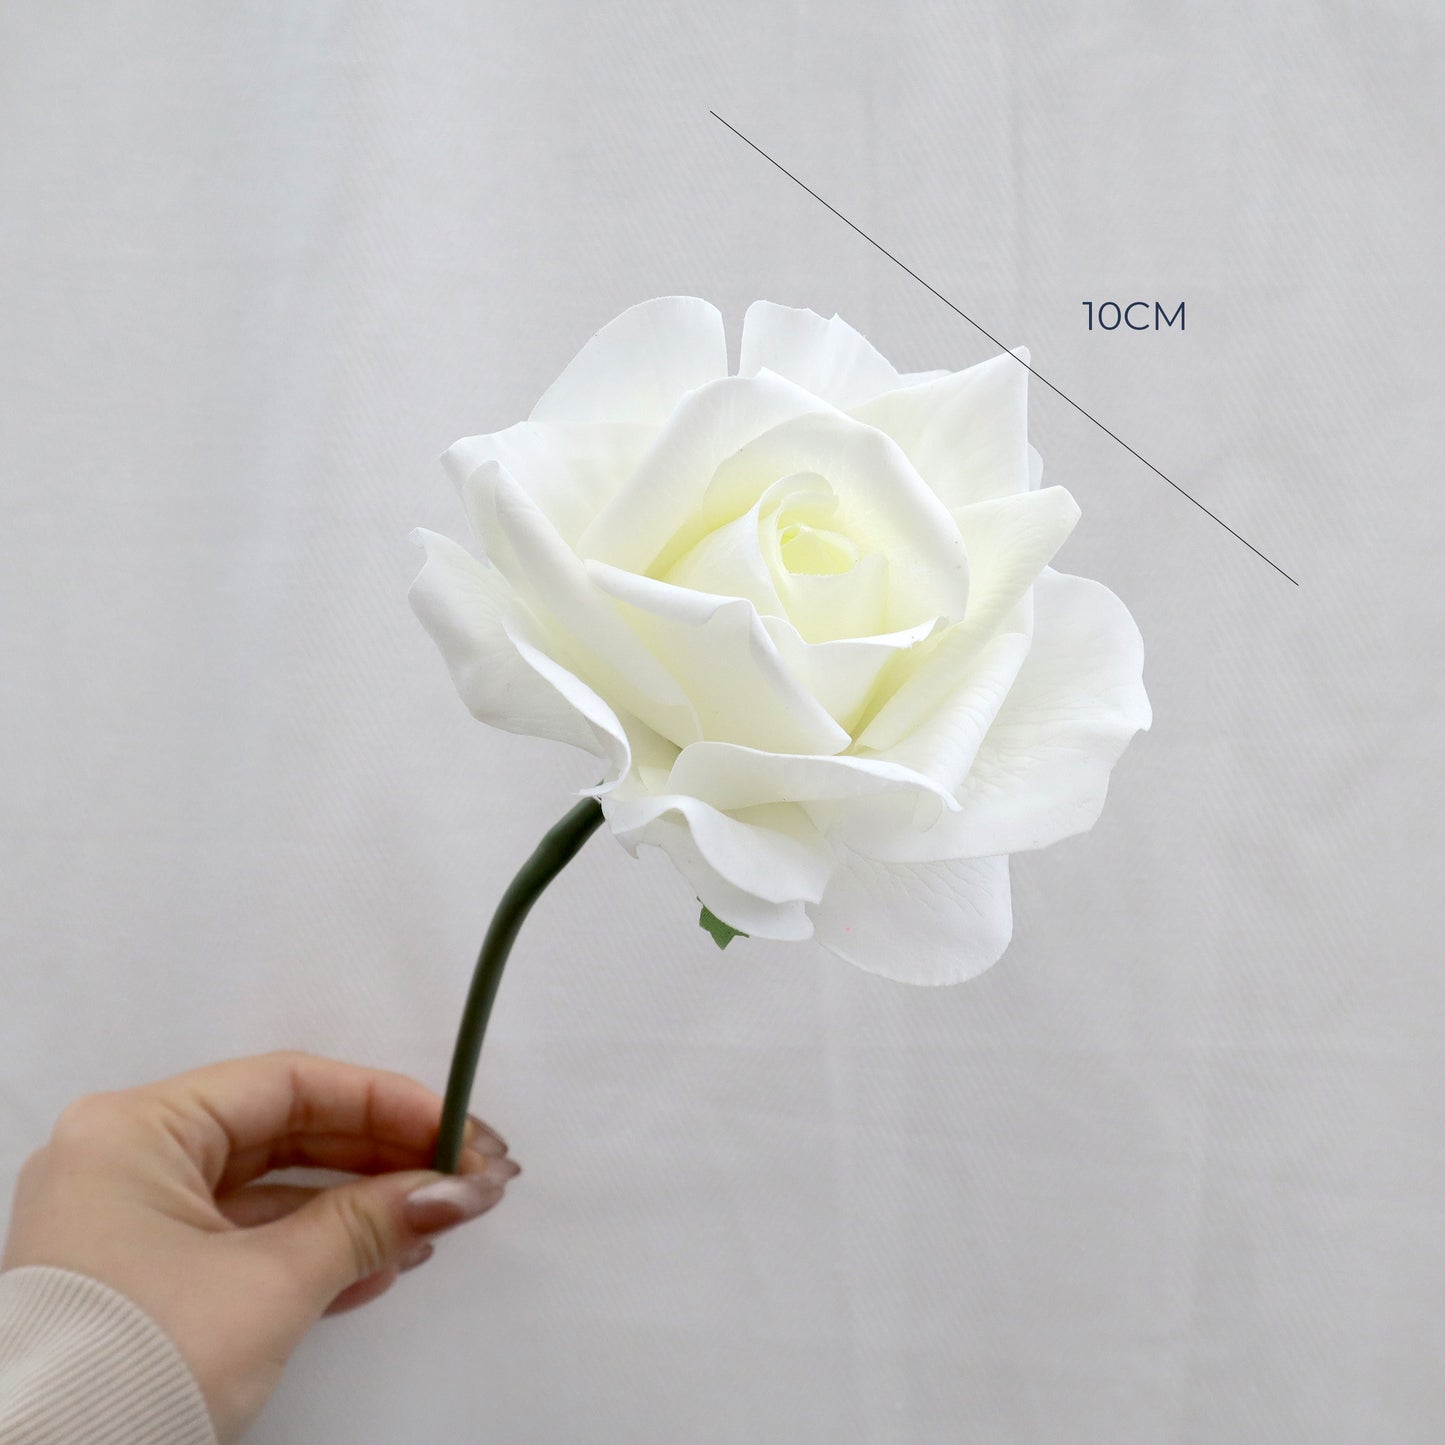 Artificial Real Touch Rose Bundle White 5 Stems